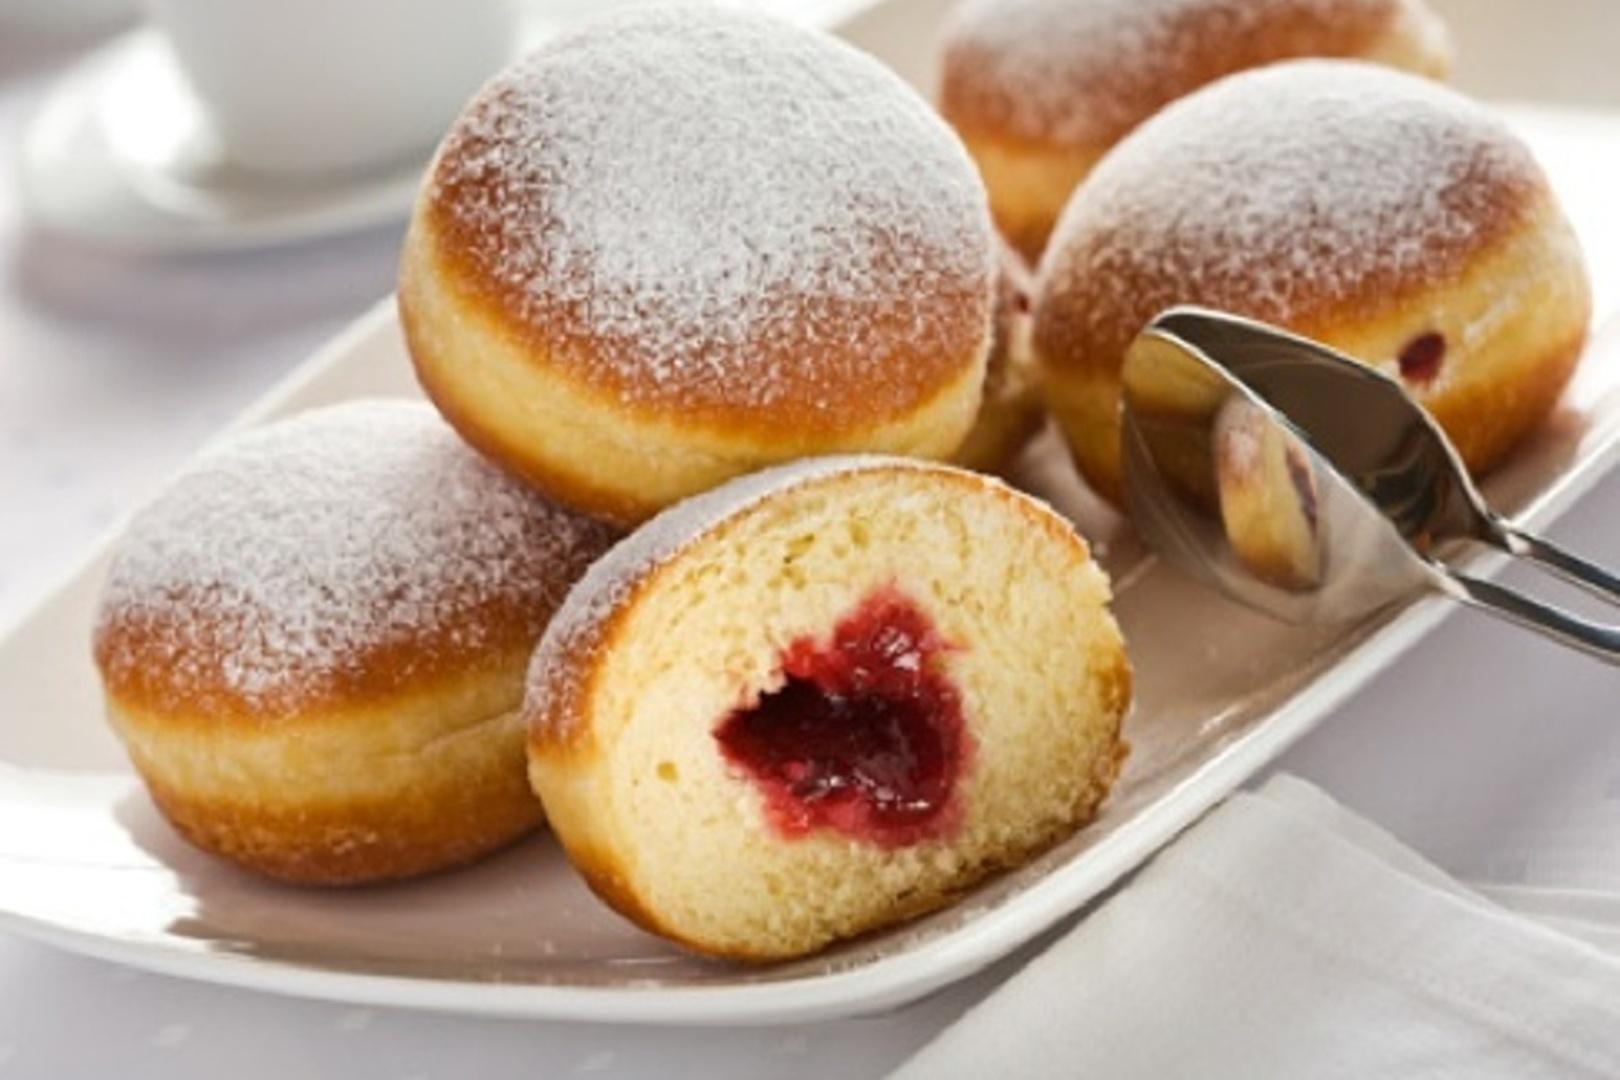 East Village: Homemade Beignets (French Donuts) (07-21-2020 starts at 6:30 PM)